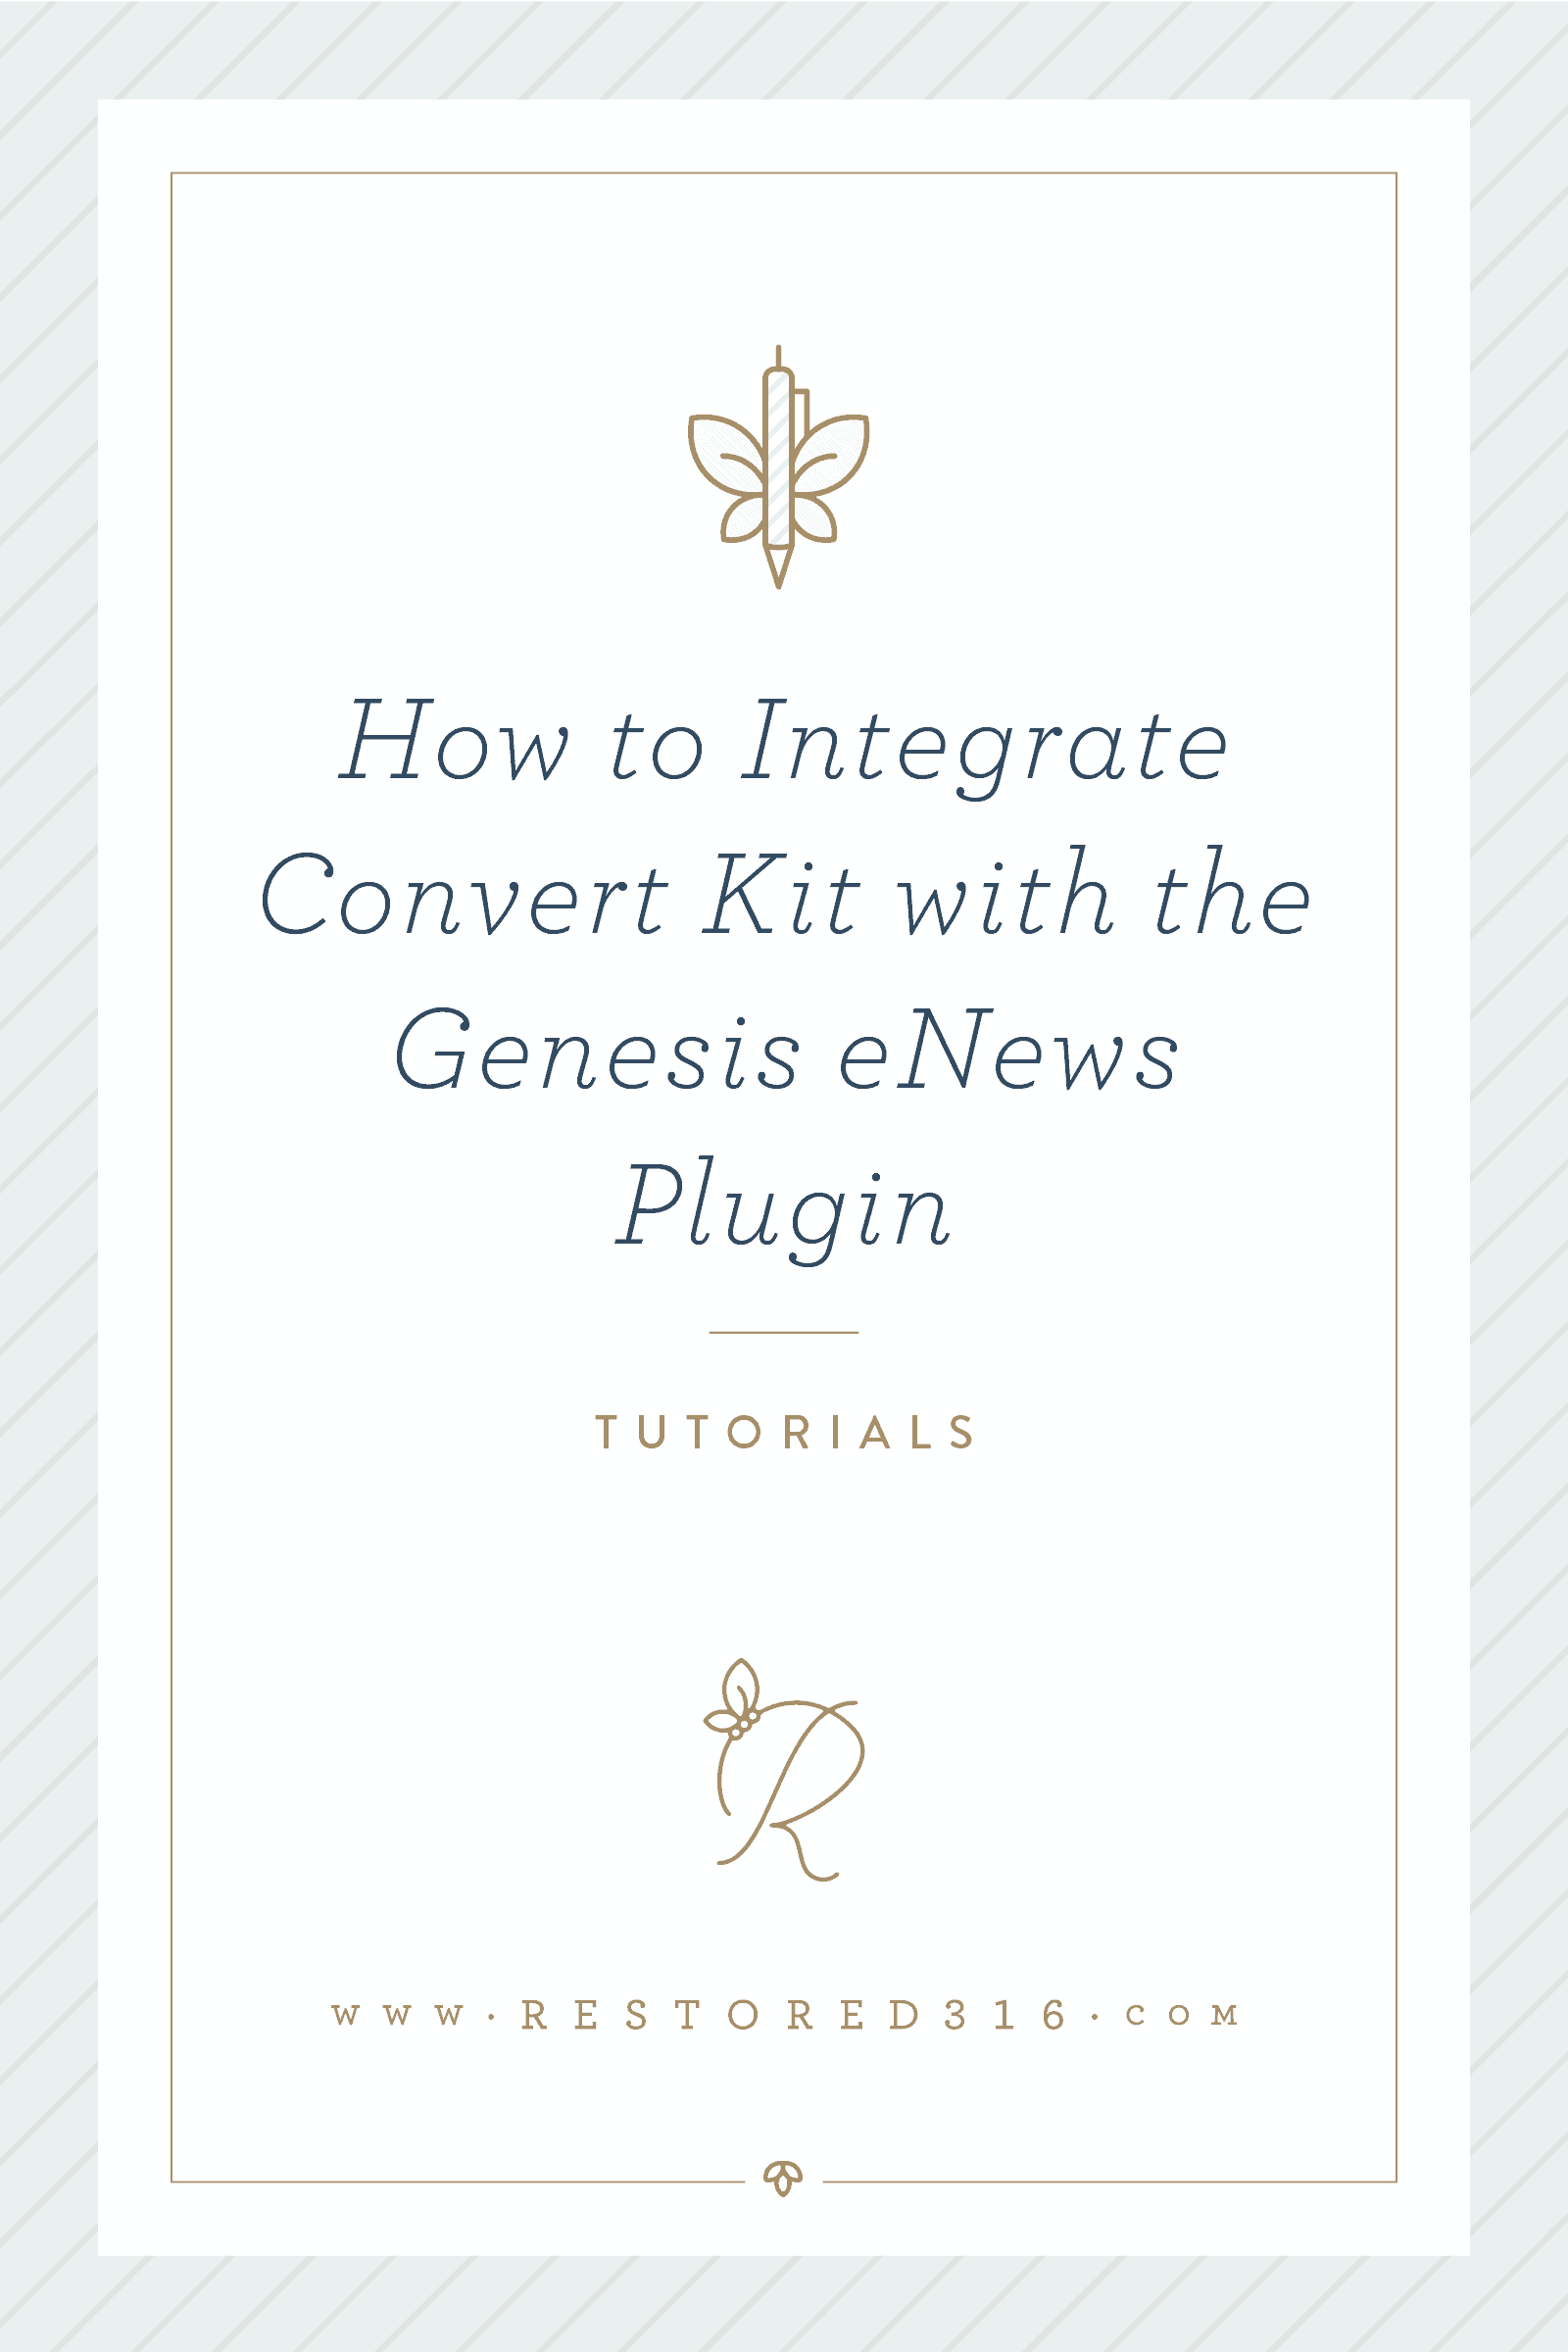 How to Integrate ConvertKit with the Genesis enews Plugin